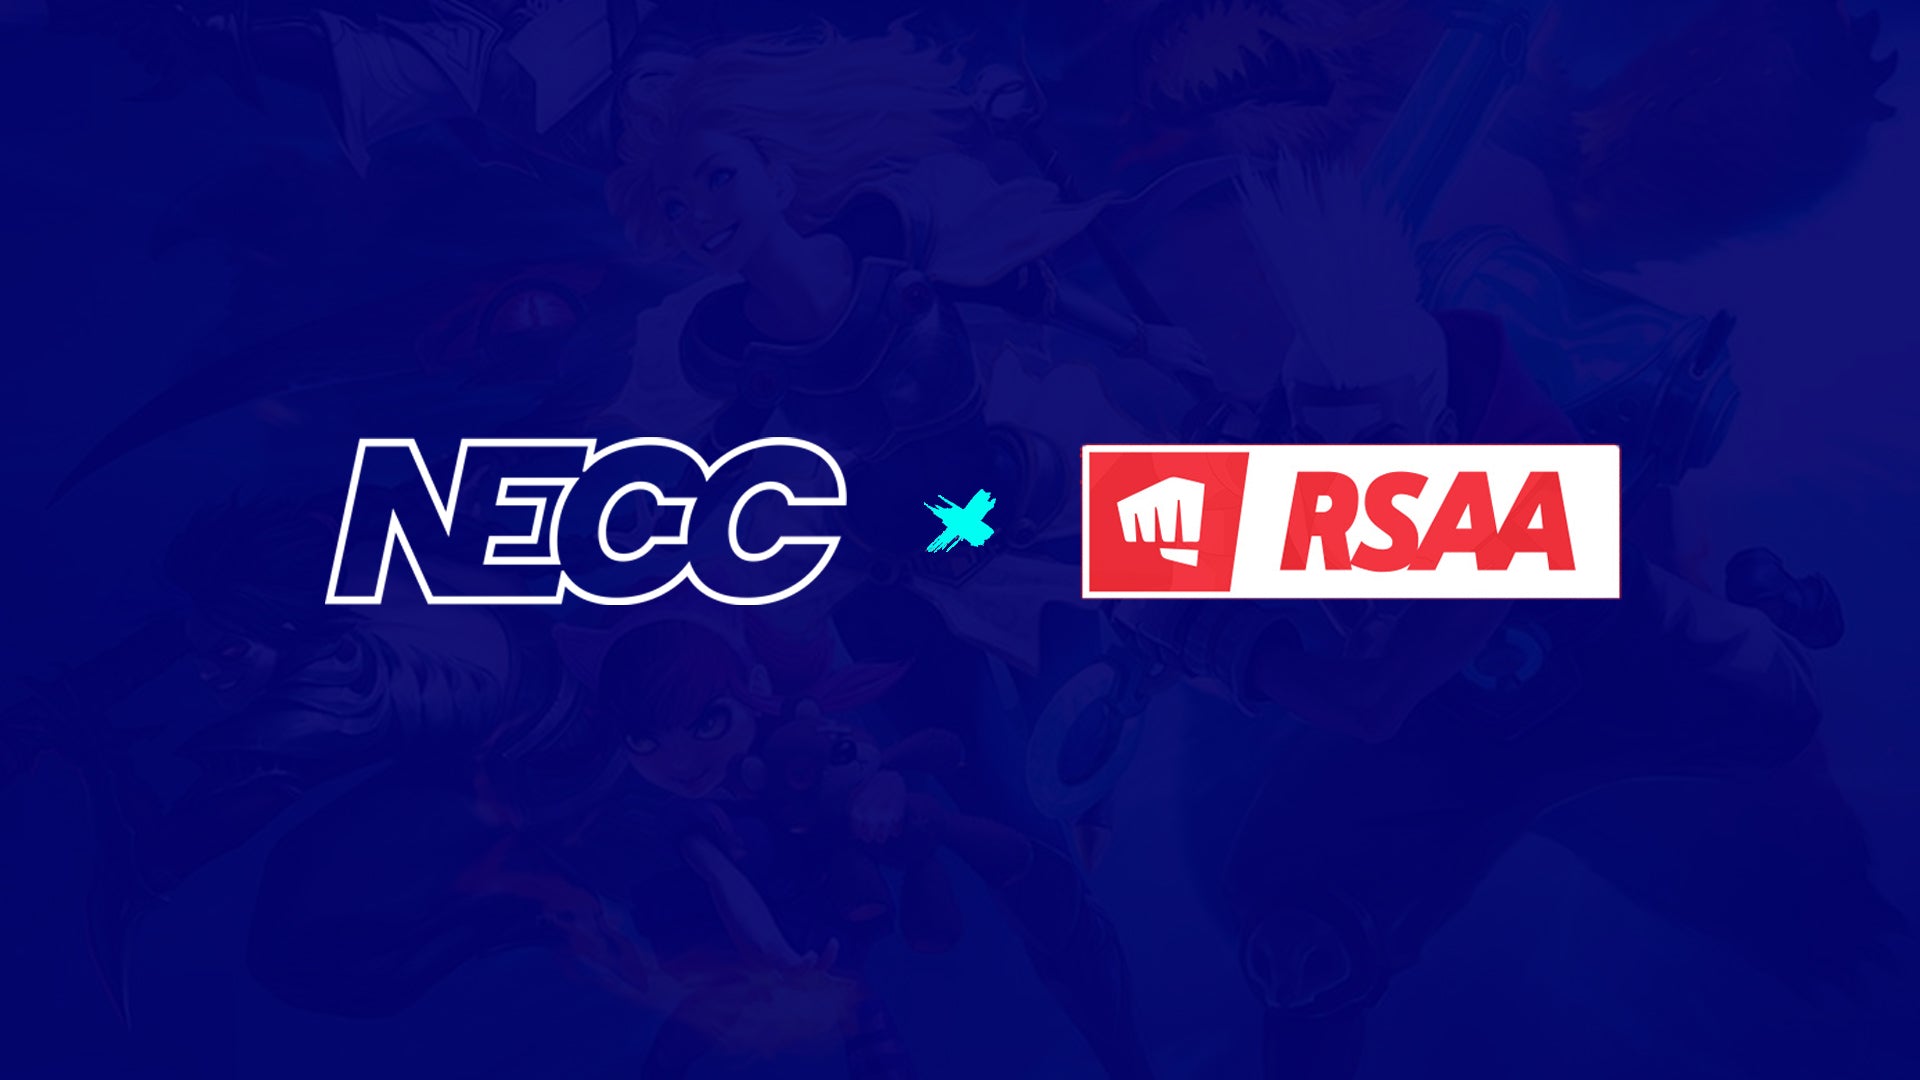 NECC Named Partner Conference by Riot Games, Will have College League of Legends Access Beginning in 2022